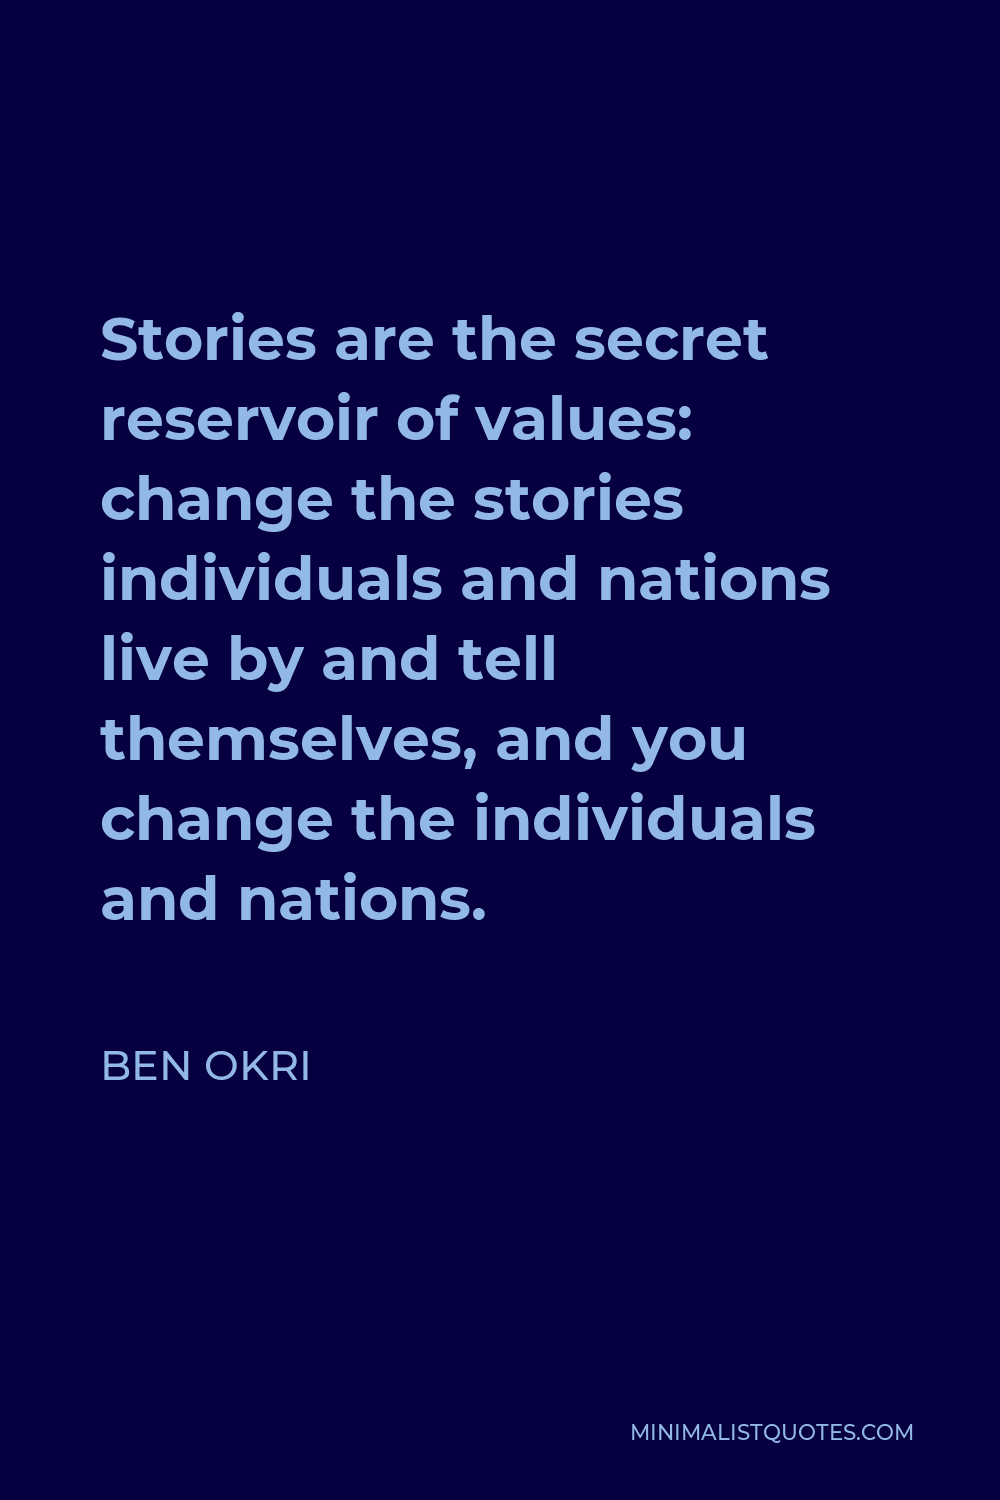 Ben Okri Quote - Stories are the secret reservoir of values: change the stories individuals and nations live by and tell themselves, and you change the individuals and nations.